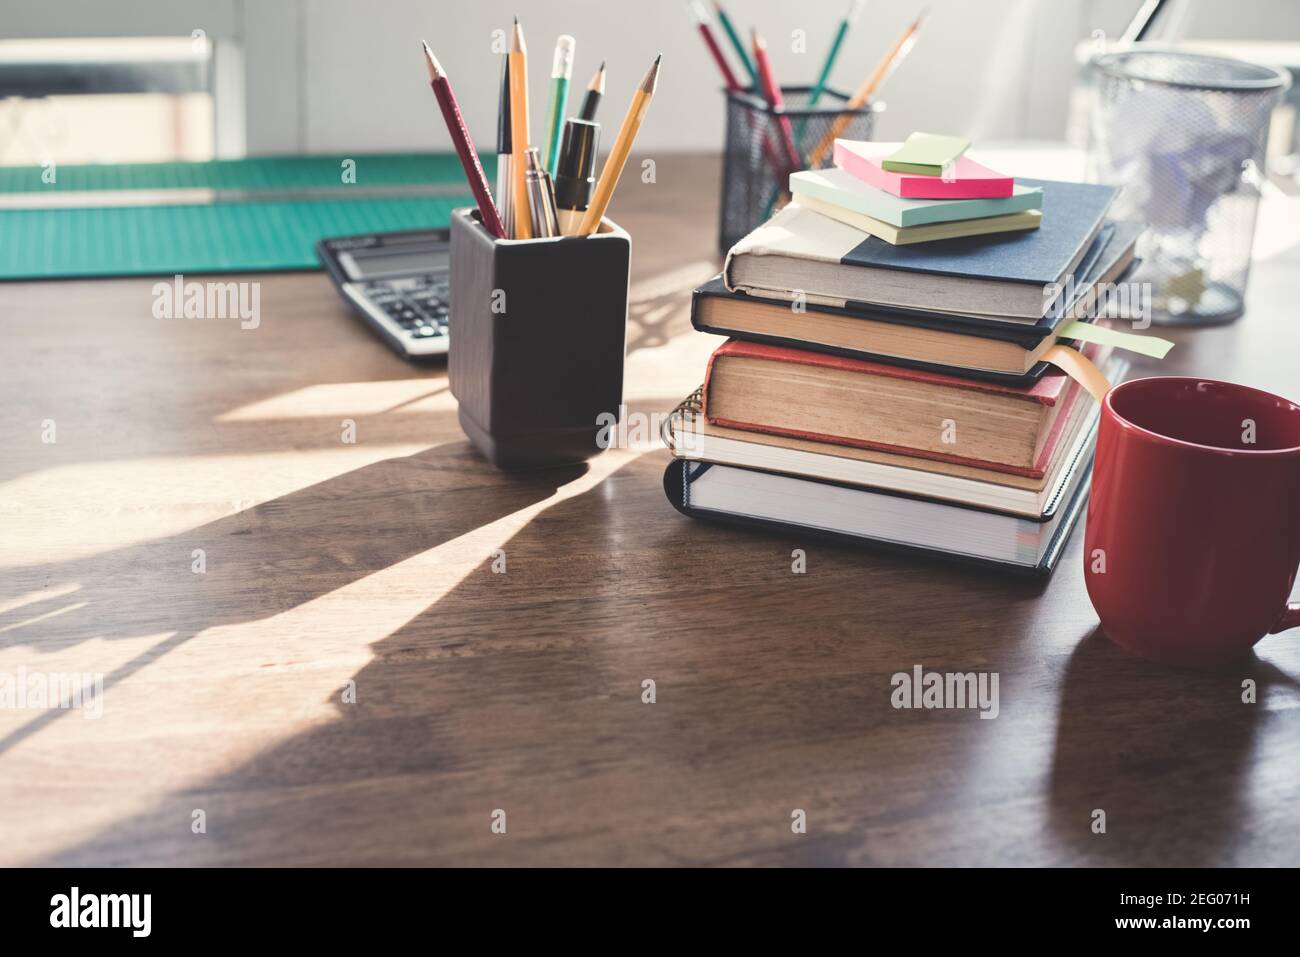 Stack of books and stationery on wood table Stock Photo